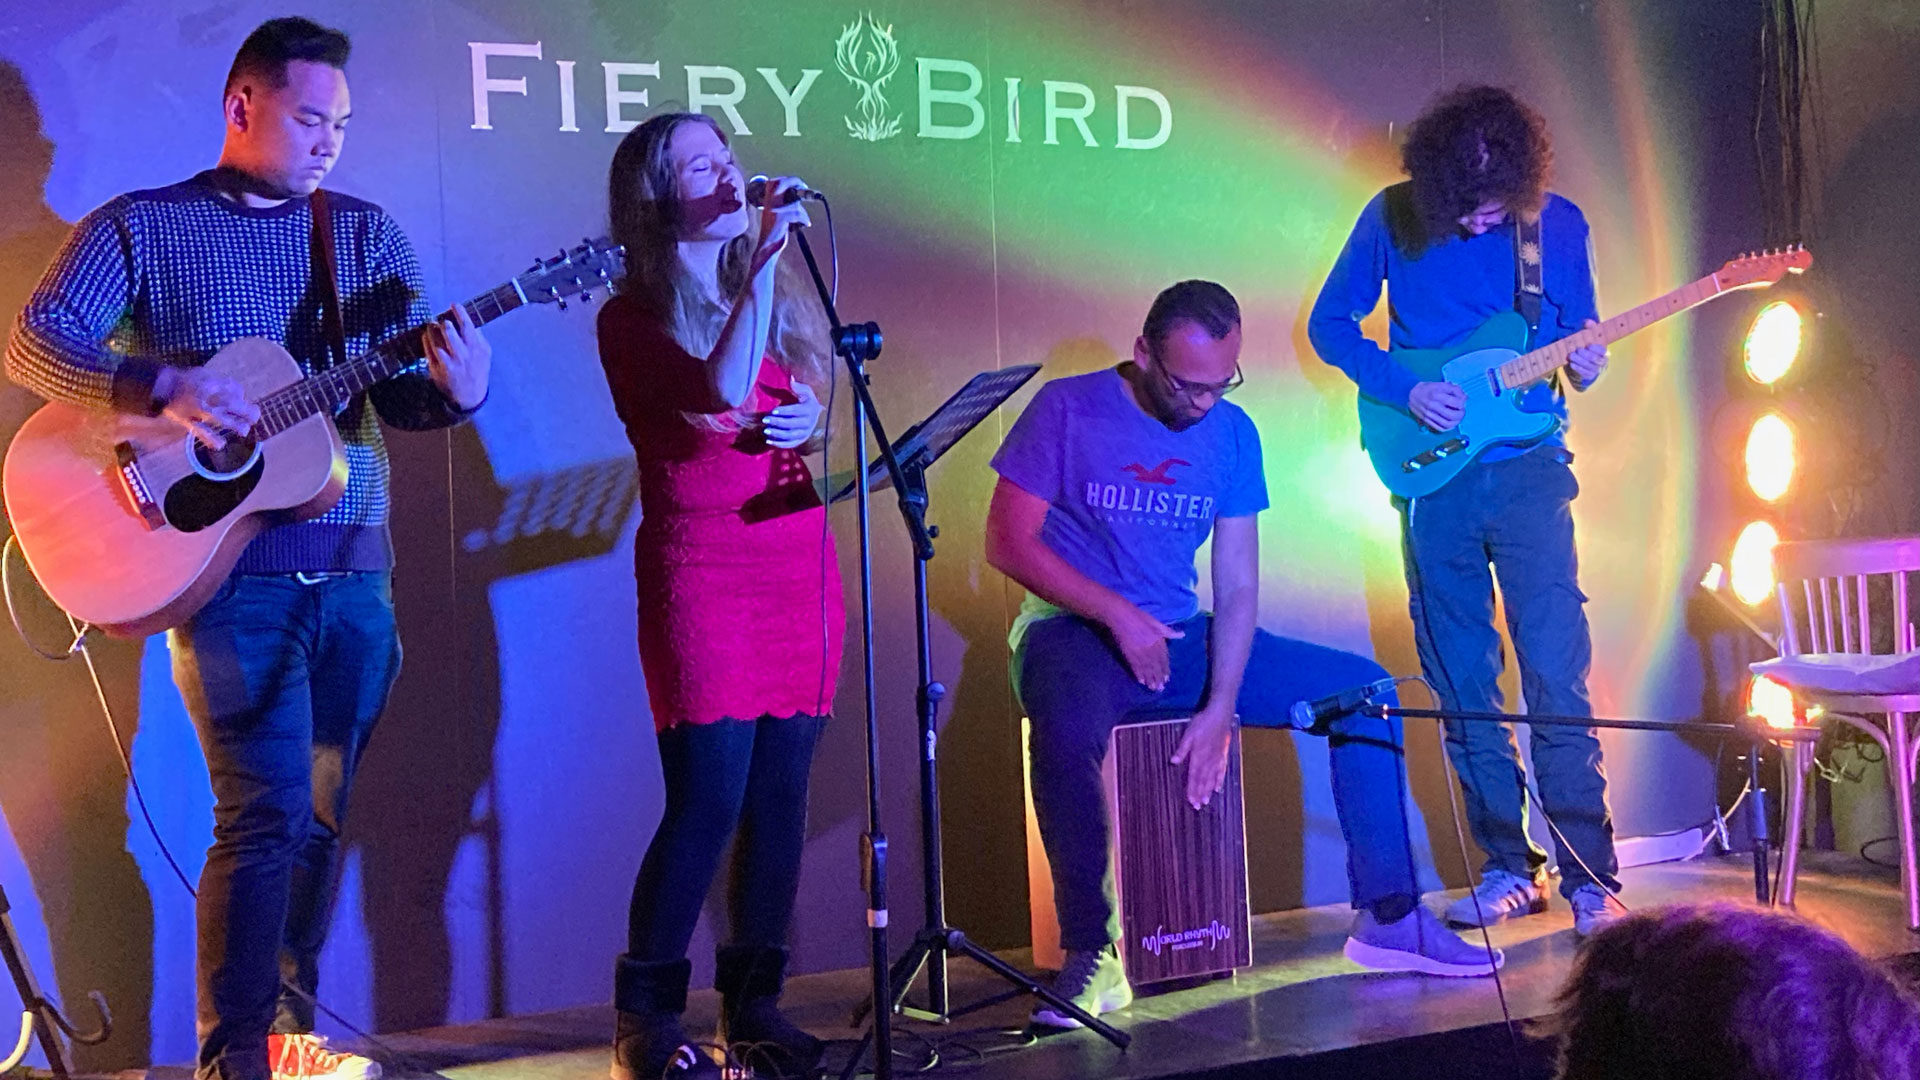 Live band on stage at Fiery Bird grassroots music venue, part of the Phoenix Cultural Centre in Woking - Big Issue Venue Watch